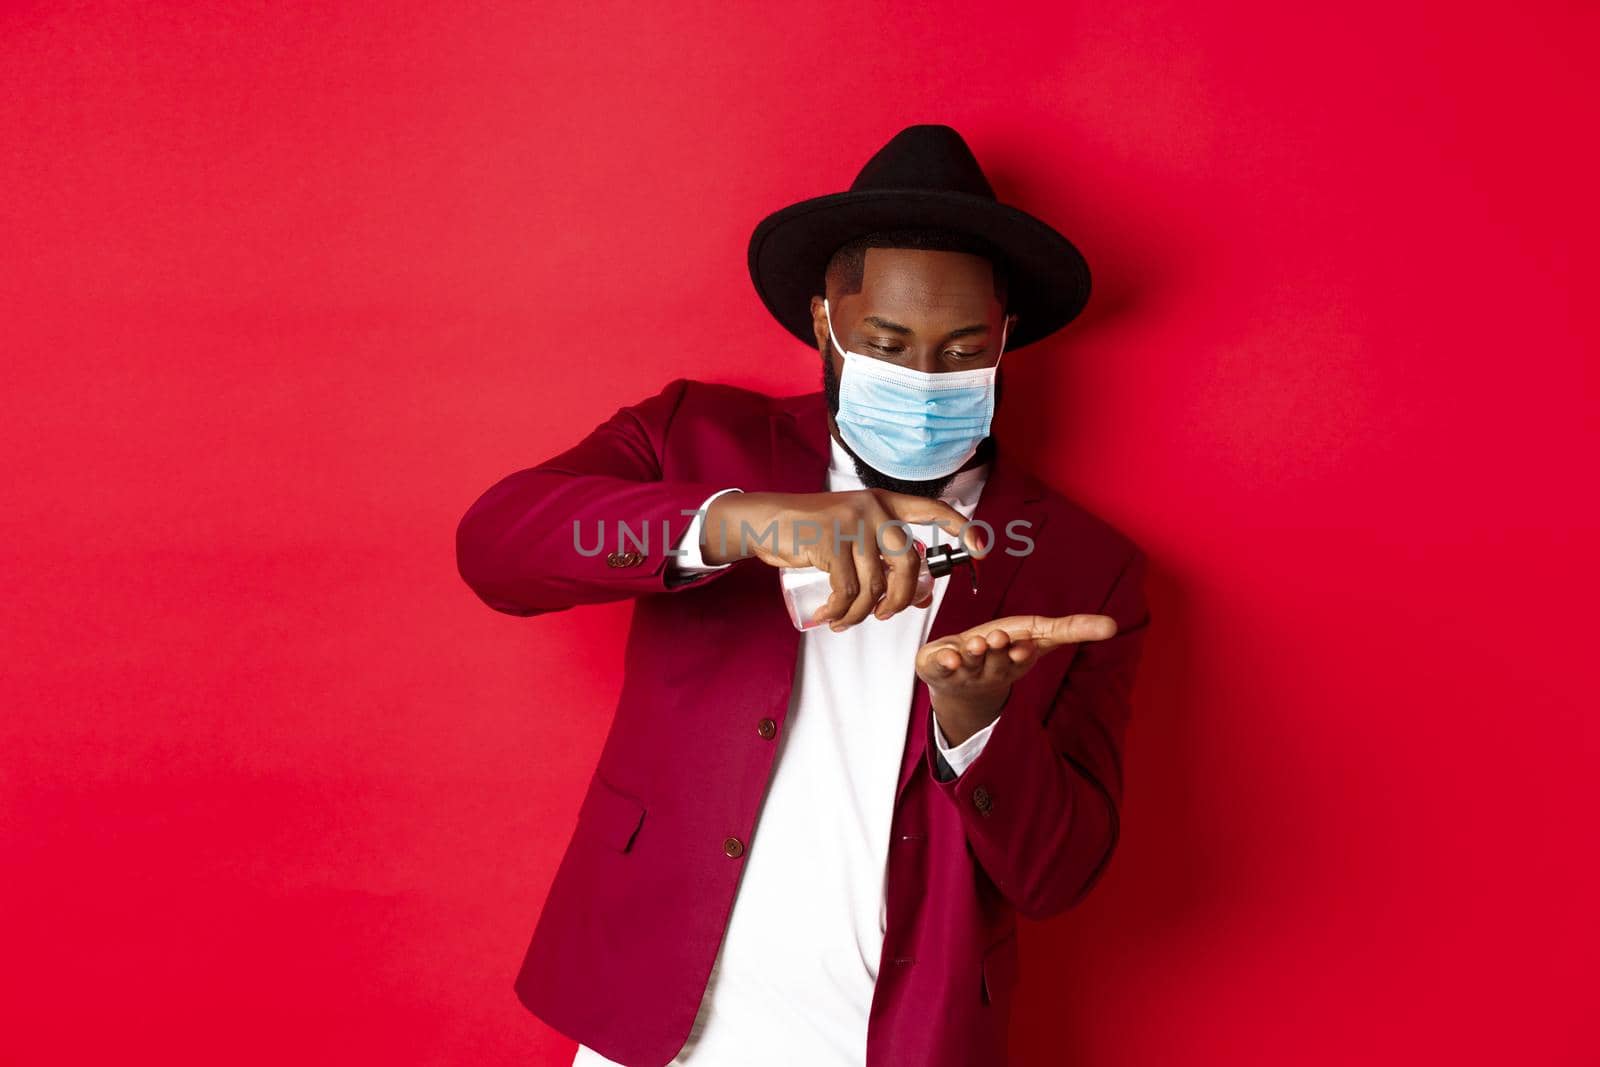 Covid-19, quarantine and holidays concept. Handsome Black man in face mask and party outfit, disinfecting hands with hand sanitizer, using antiseptic, standing over red background.